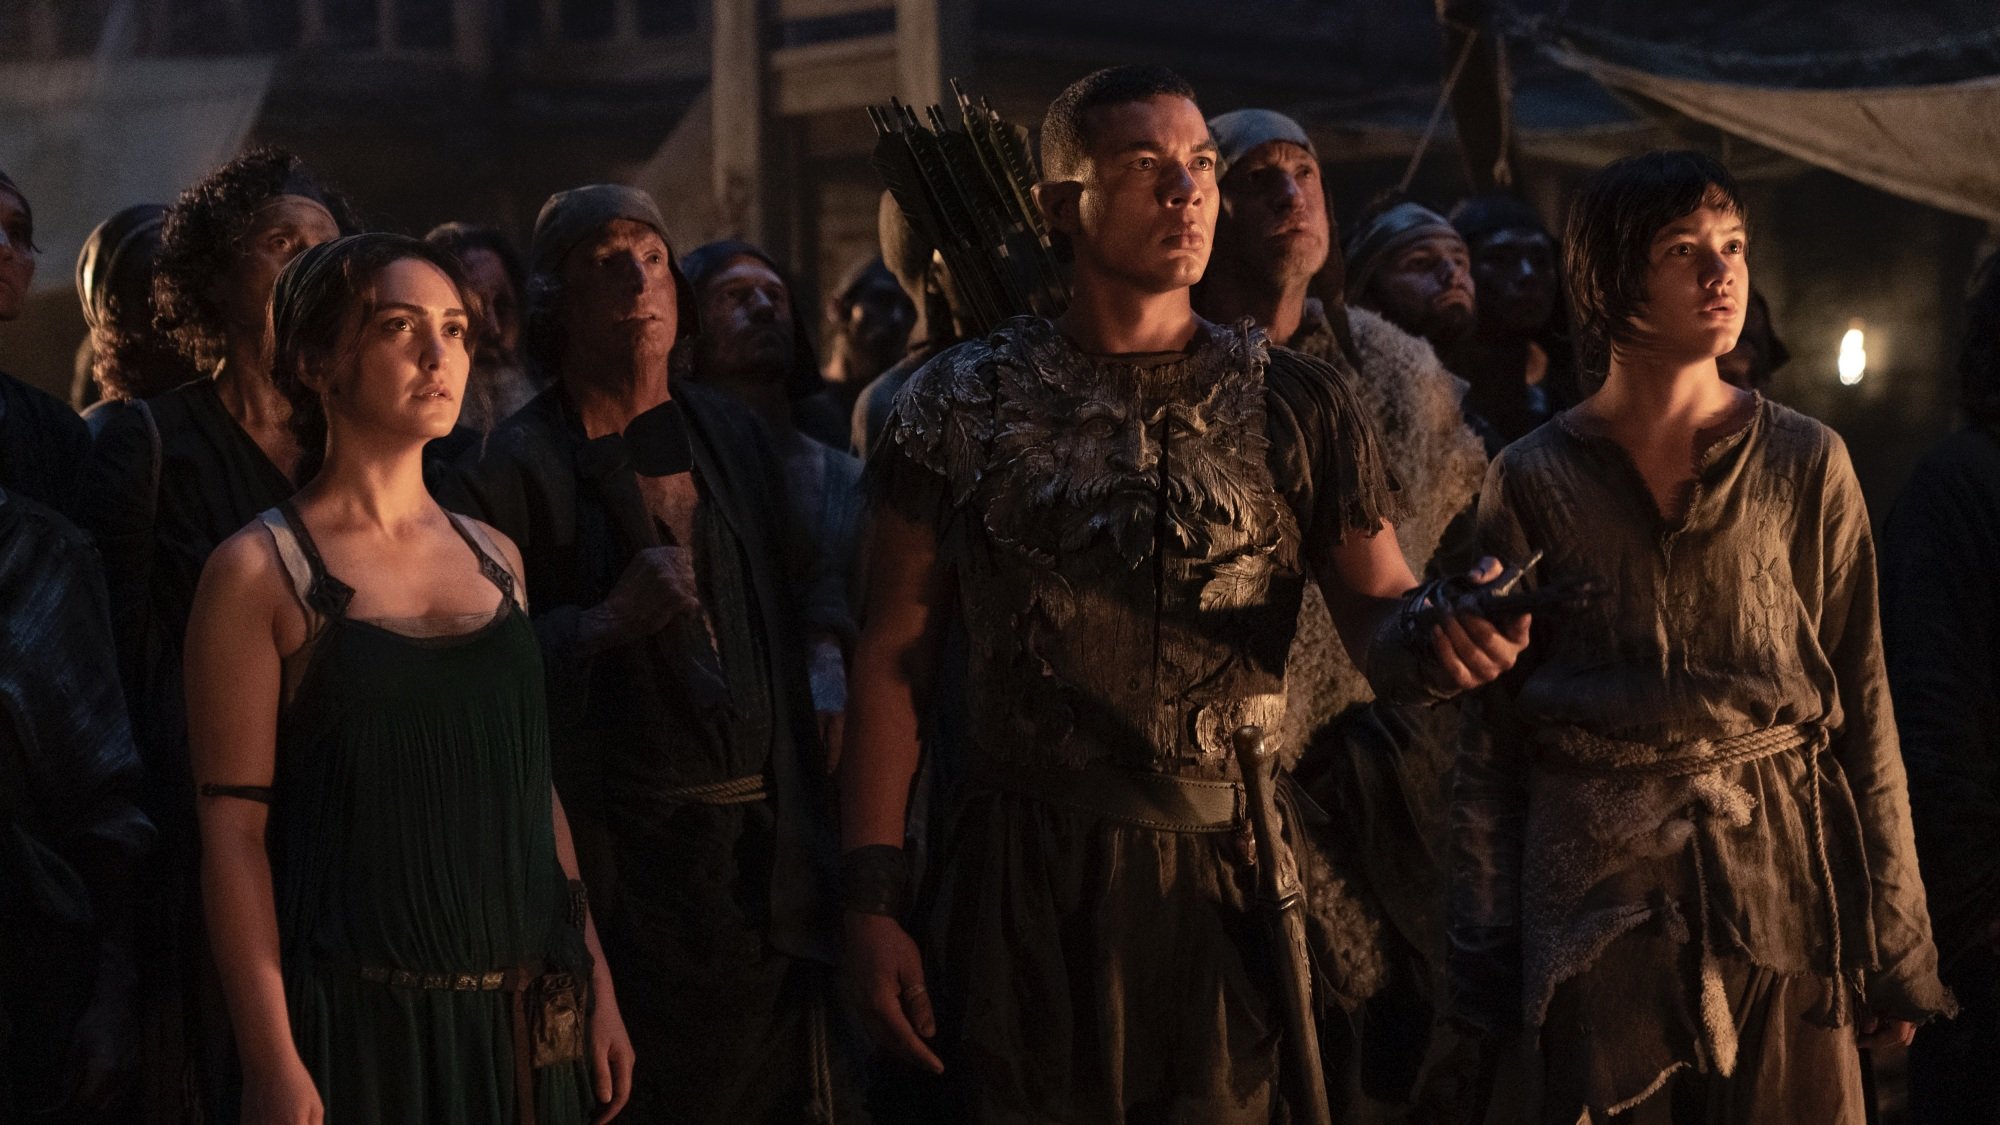 A human woman, her young son, and an elven man in armor stand at the front of a worried crowd.